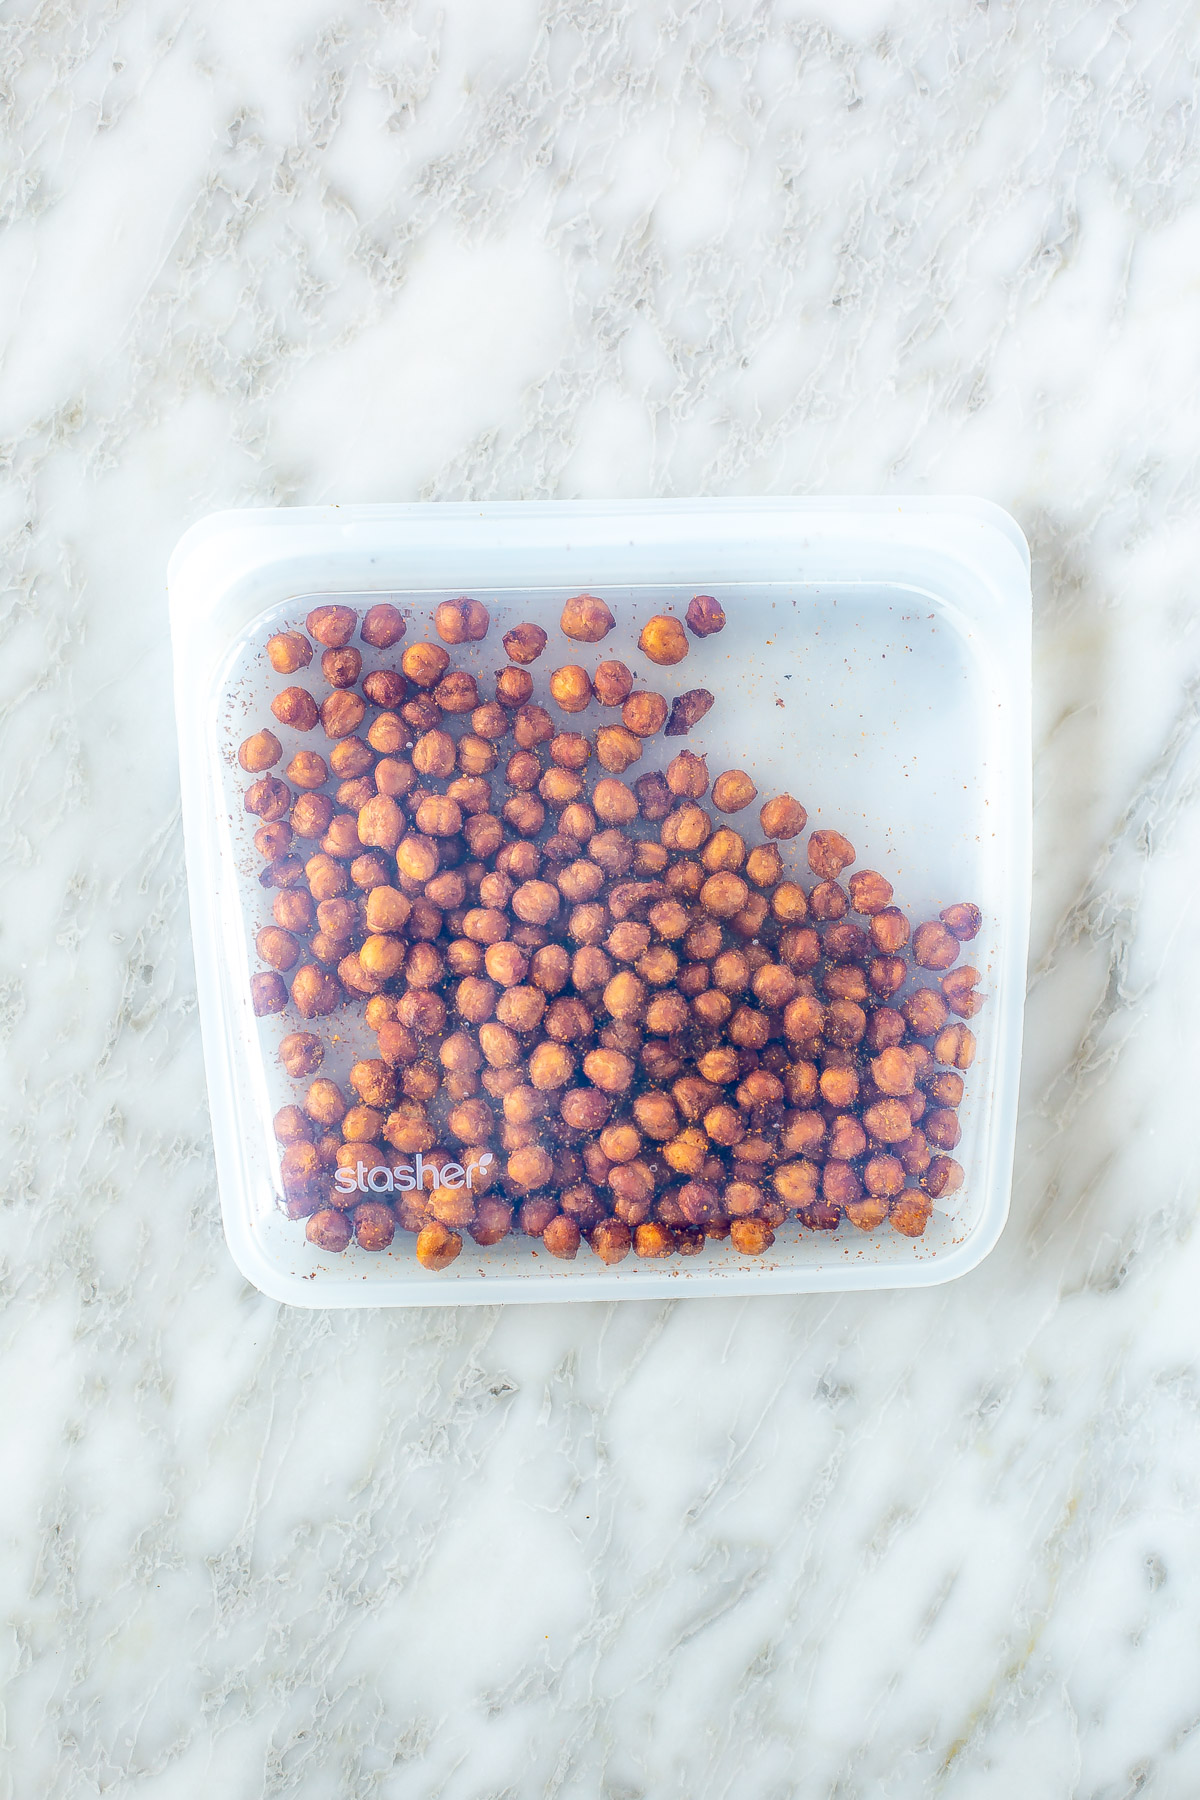 A stasher bag with air fryer chickpeas.